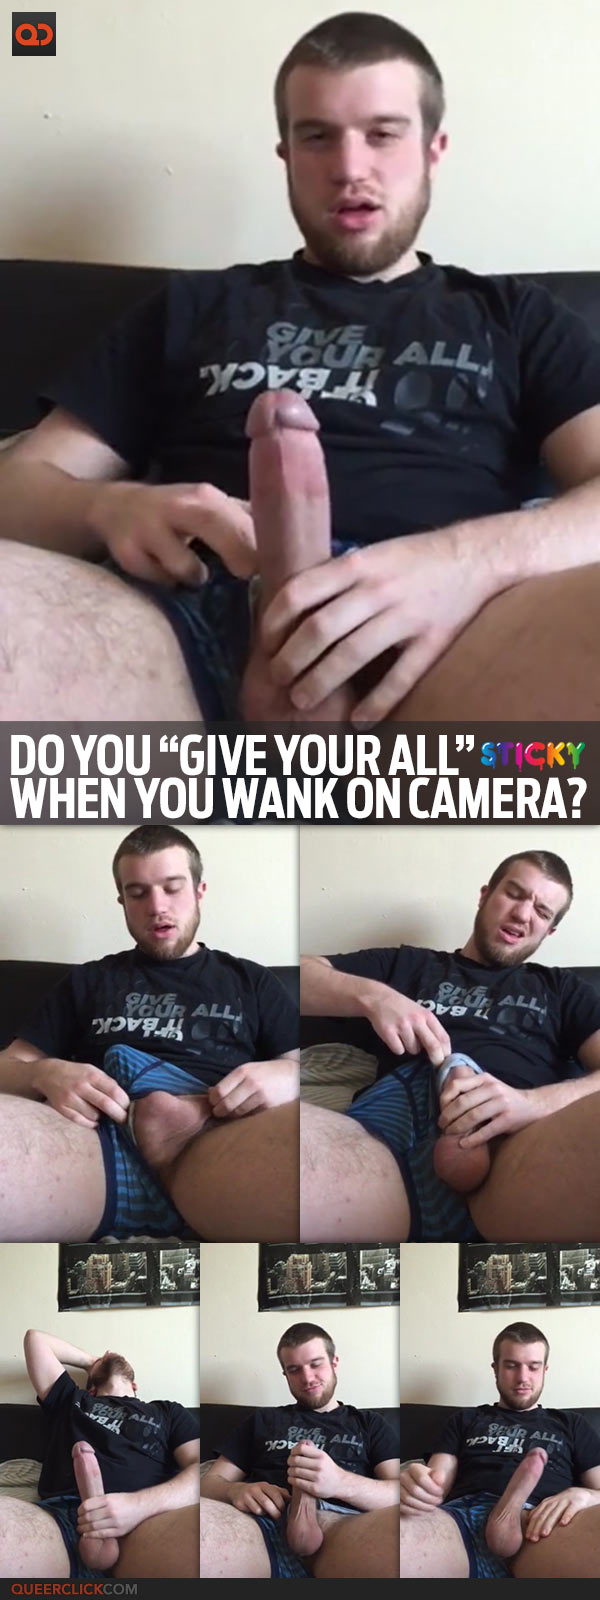 Do You “Give Your All” When You Wank On Camera?